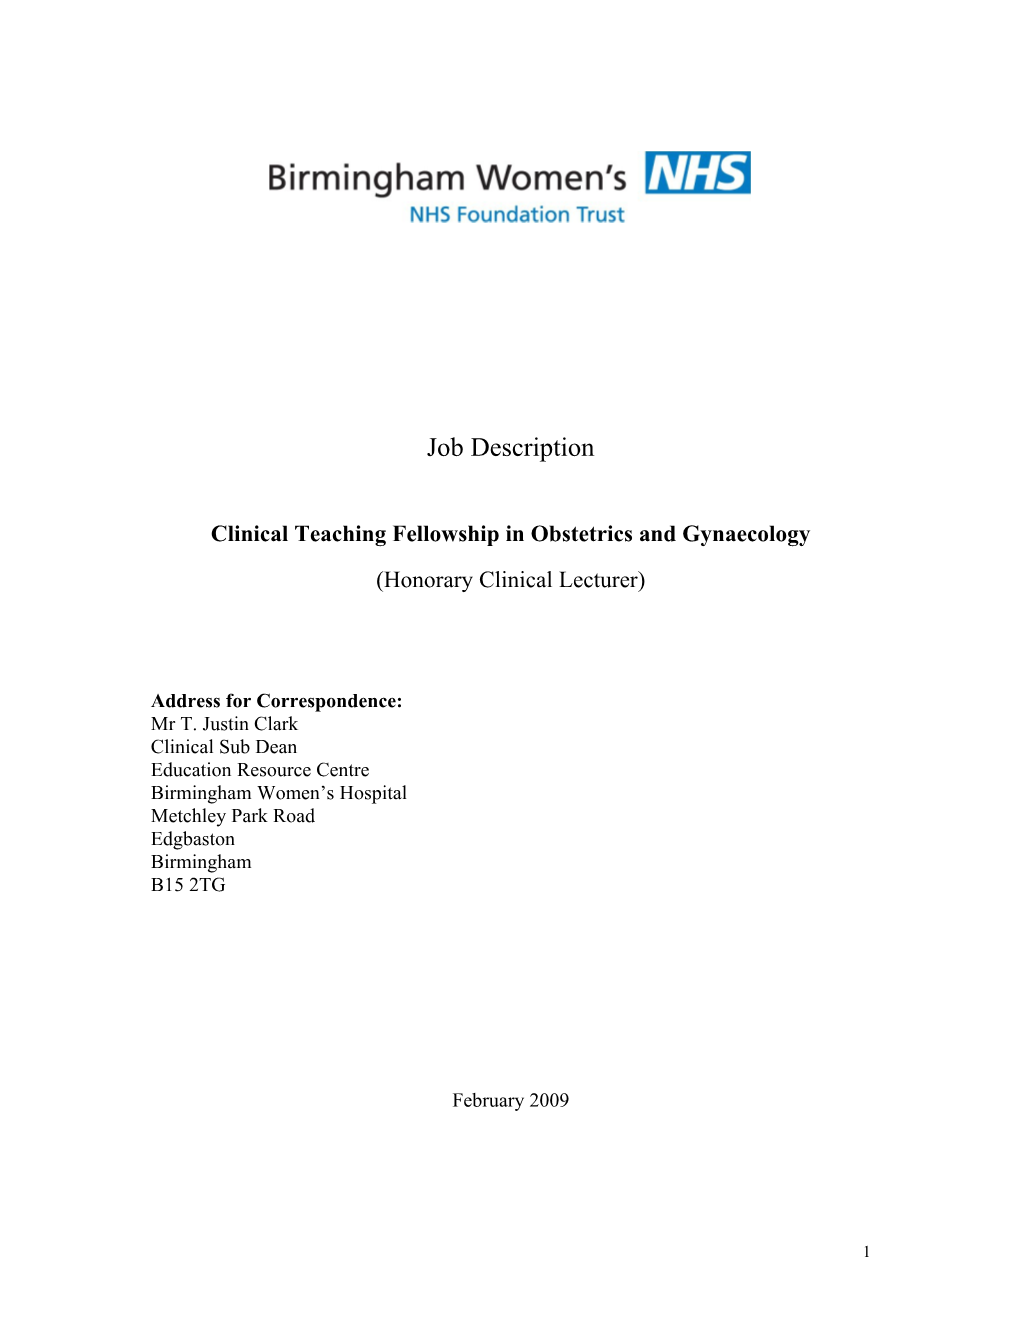 Clinical Teaching Fellowship in Obstetrics and Gynaecology